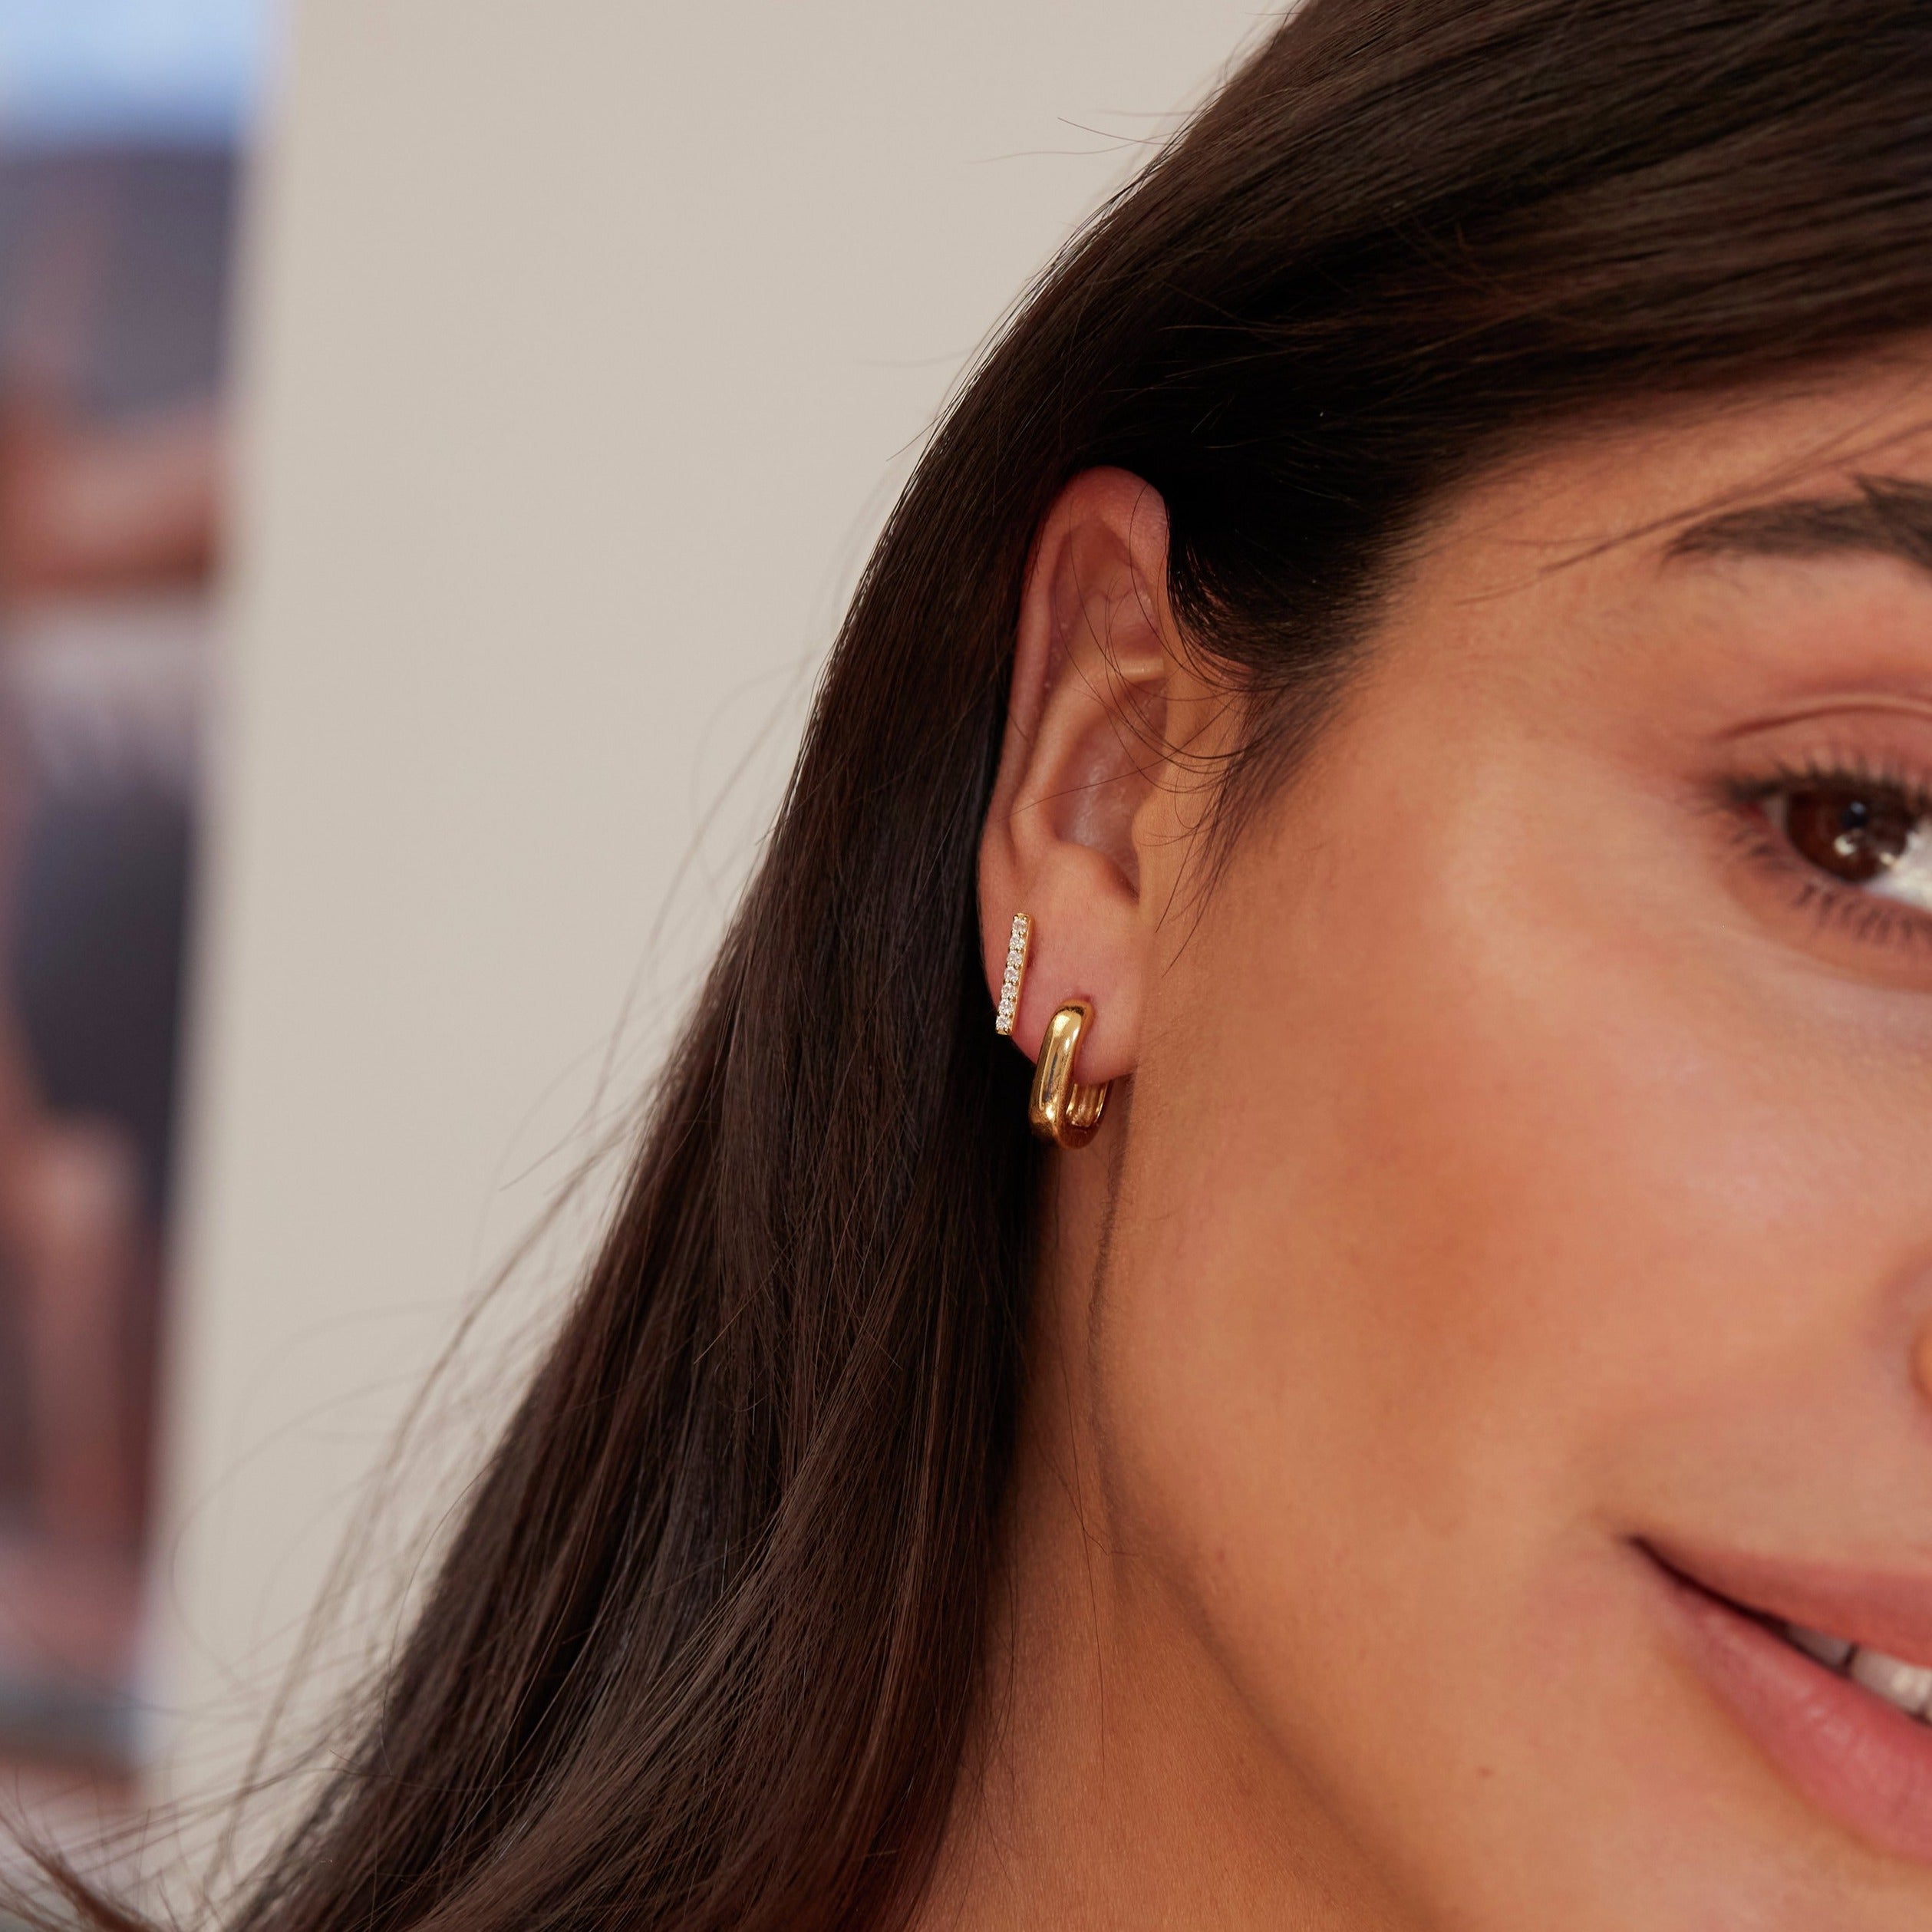 A brunette woman wearing a gold thick squared hoop earring and a gold diamond style bar stud in her ear lobe